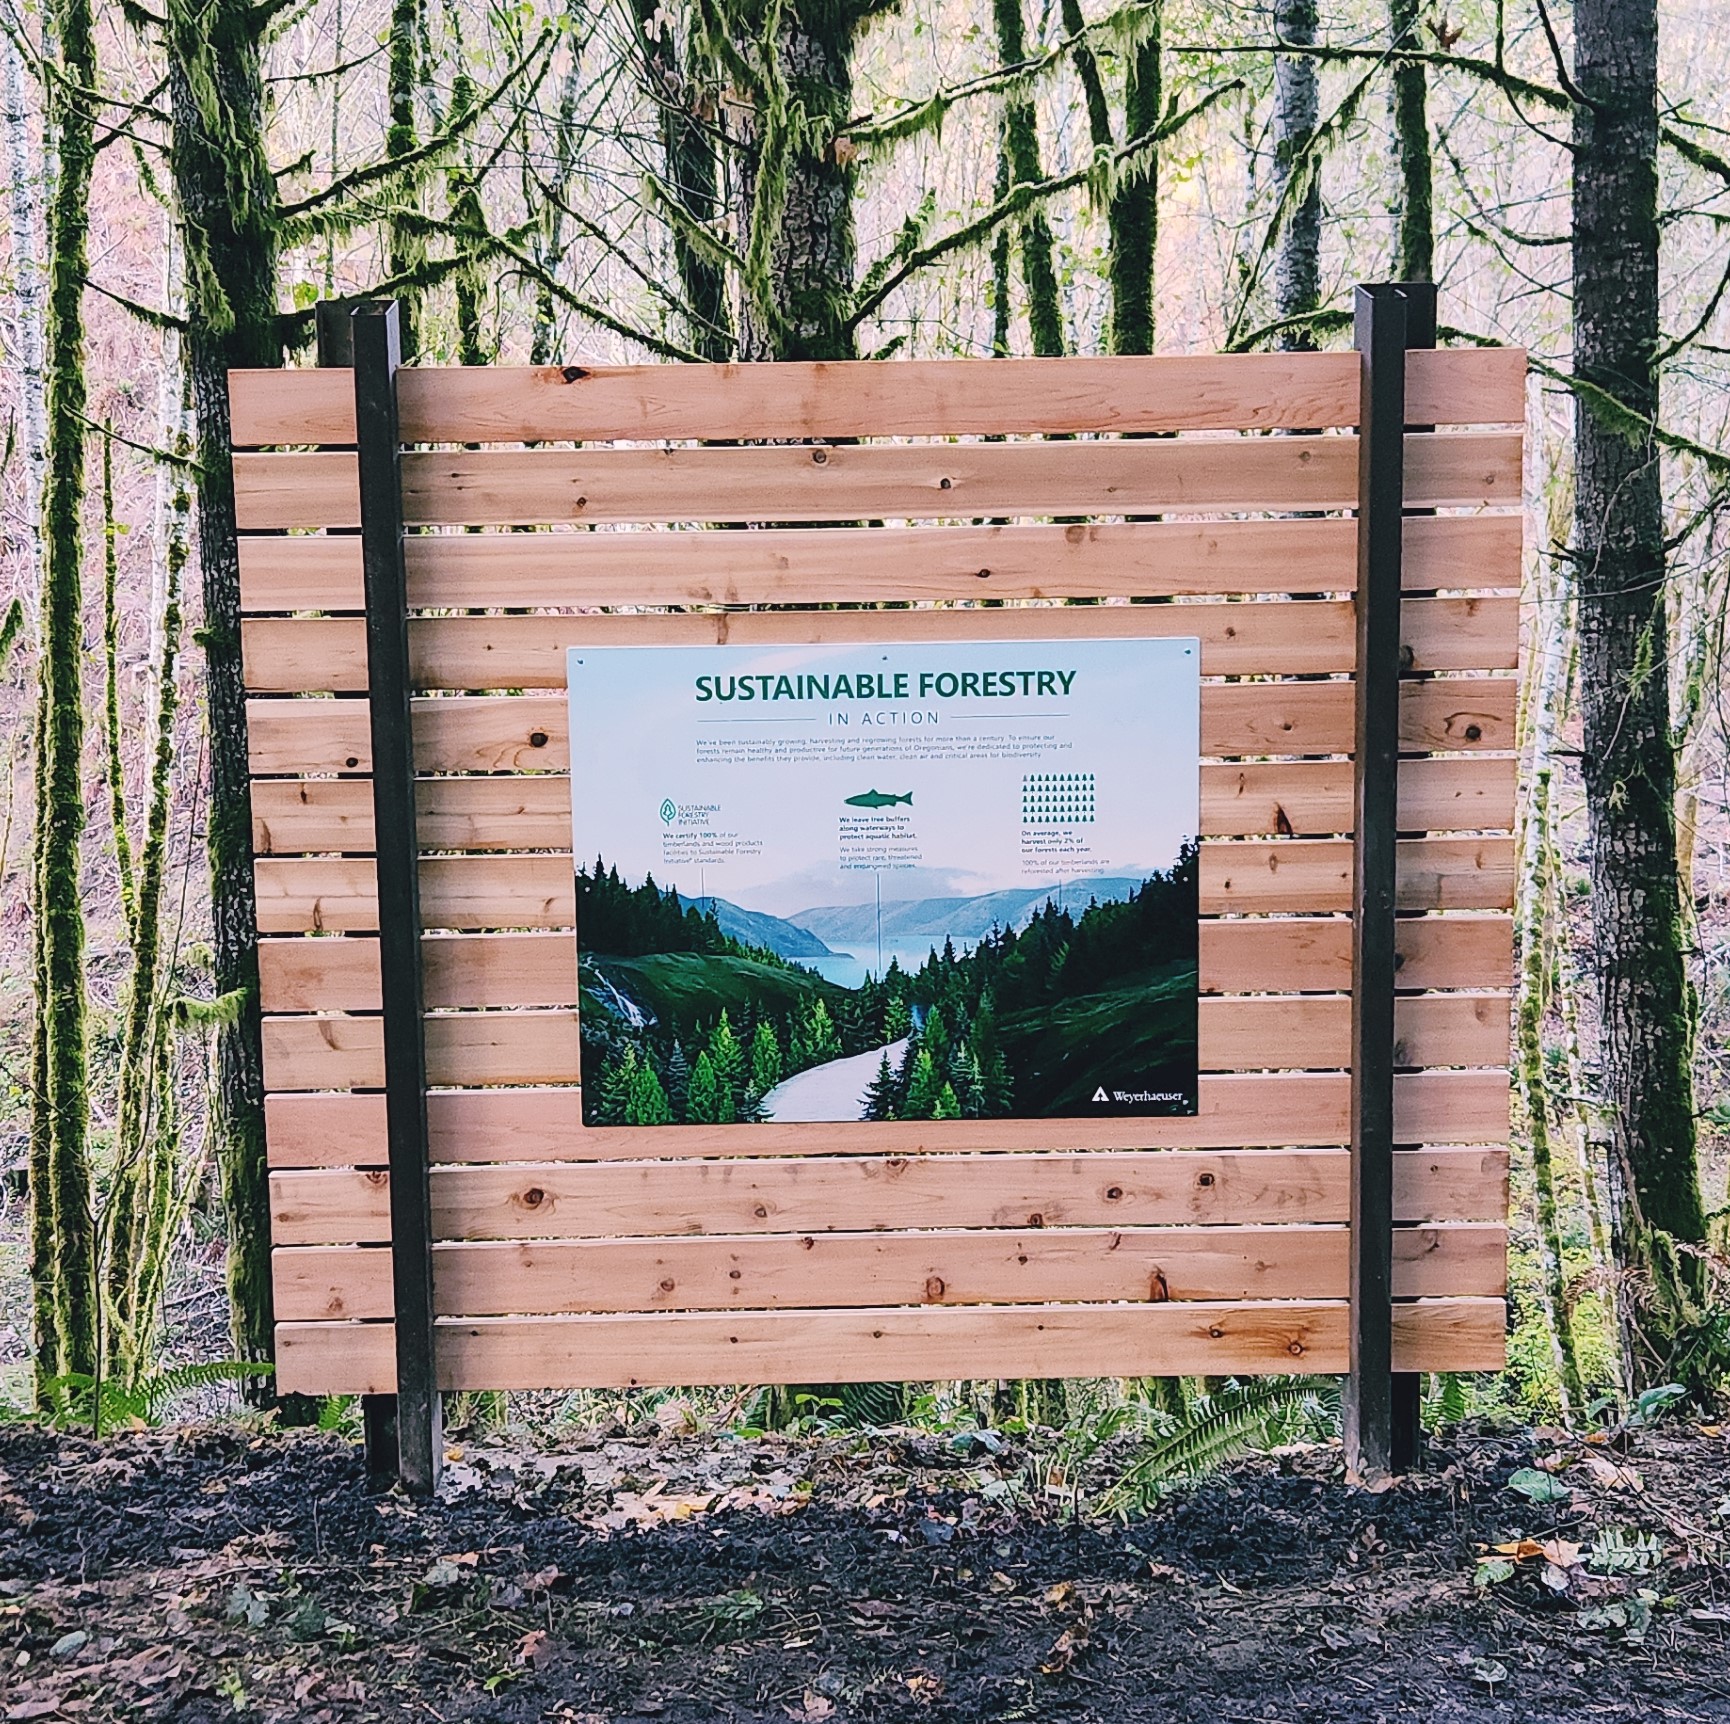 Image of a forestry sign set near a stream so visitors can learn about and see stream buffers at the same time.